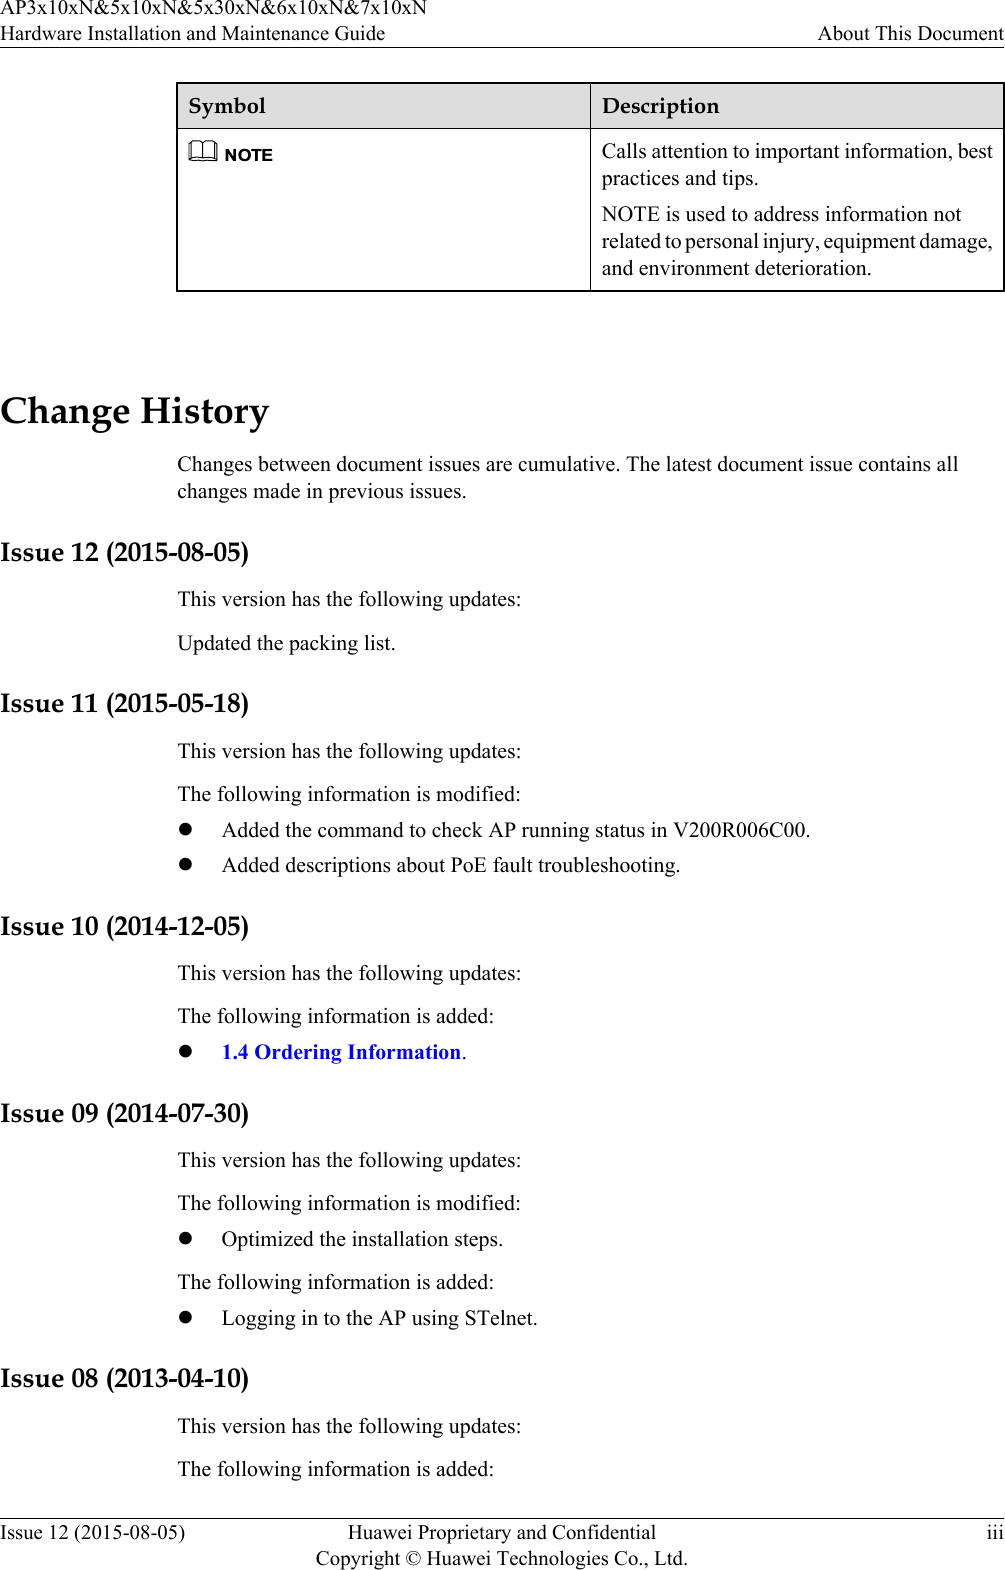 Symbol DescriptionNOTECalls attention to important information, bestpractices and tips.NOTE is used to address information notrelated to personal injury, equipment damage,and environment deterioration. Change HistoryChanges between document issues are cumulative. The latest document issue contains allchanges made in previous issues.Issue 12 (2015-08-05)This version has the following updates:Updated the packing list.Issue 11 (2015-05-18)This version has the following updates:The following information is modified:lAdded the command to check AP running status in V200R006C00.lAdded descriptions about PoE fault troubleshooting.Issue 10 (2014-12-05)This version has the following updates:The following information is added:l1.4 Ordering Information.Issue 09 (2014-07-30)This version has the following updates:The following information is modified:lOptimized the installation steps.The following information is added:lLogging in to the AP using STelnet.Issue 08 (2013-04-10)This version has the following updates:The following information is added:AP3x10xN&amp;5x10xN&amp;5x30xN&amp;6x10xN&amp;7x10xNHardware Installation and Maintenance Guide About This DocumentIssue 12 (2015-08-05) Huawei Proprietary and ConfidentialCopyright © Huawei Technologies Co., Ltd.iii